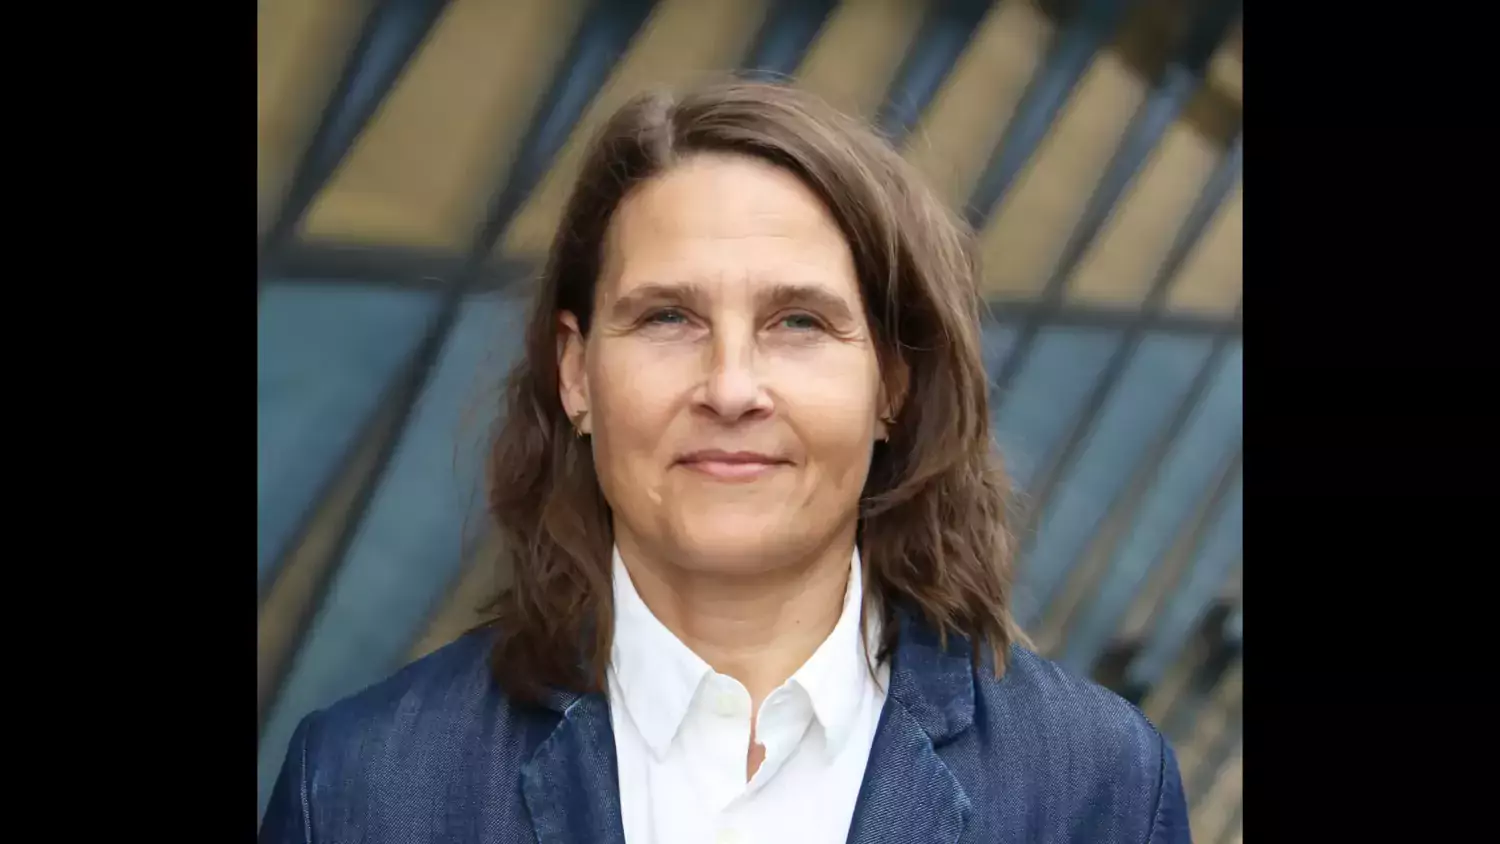 Profile photo of Lisa Strömmer, a woman with dark hair, a blue suit jacket and white shirt